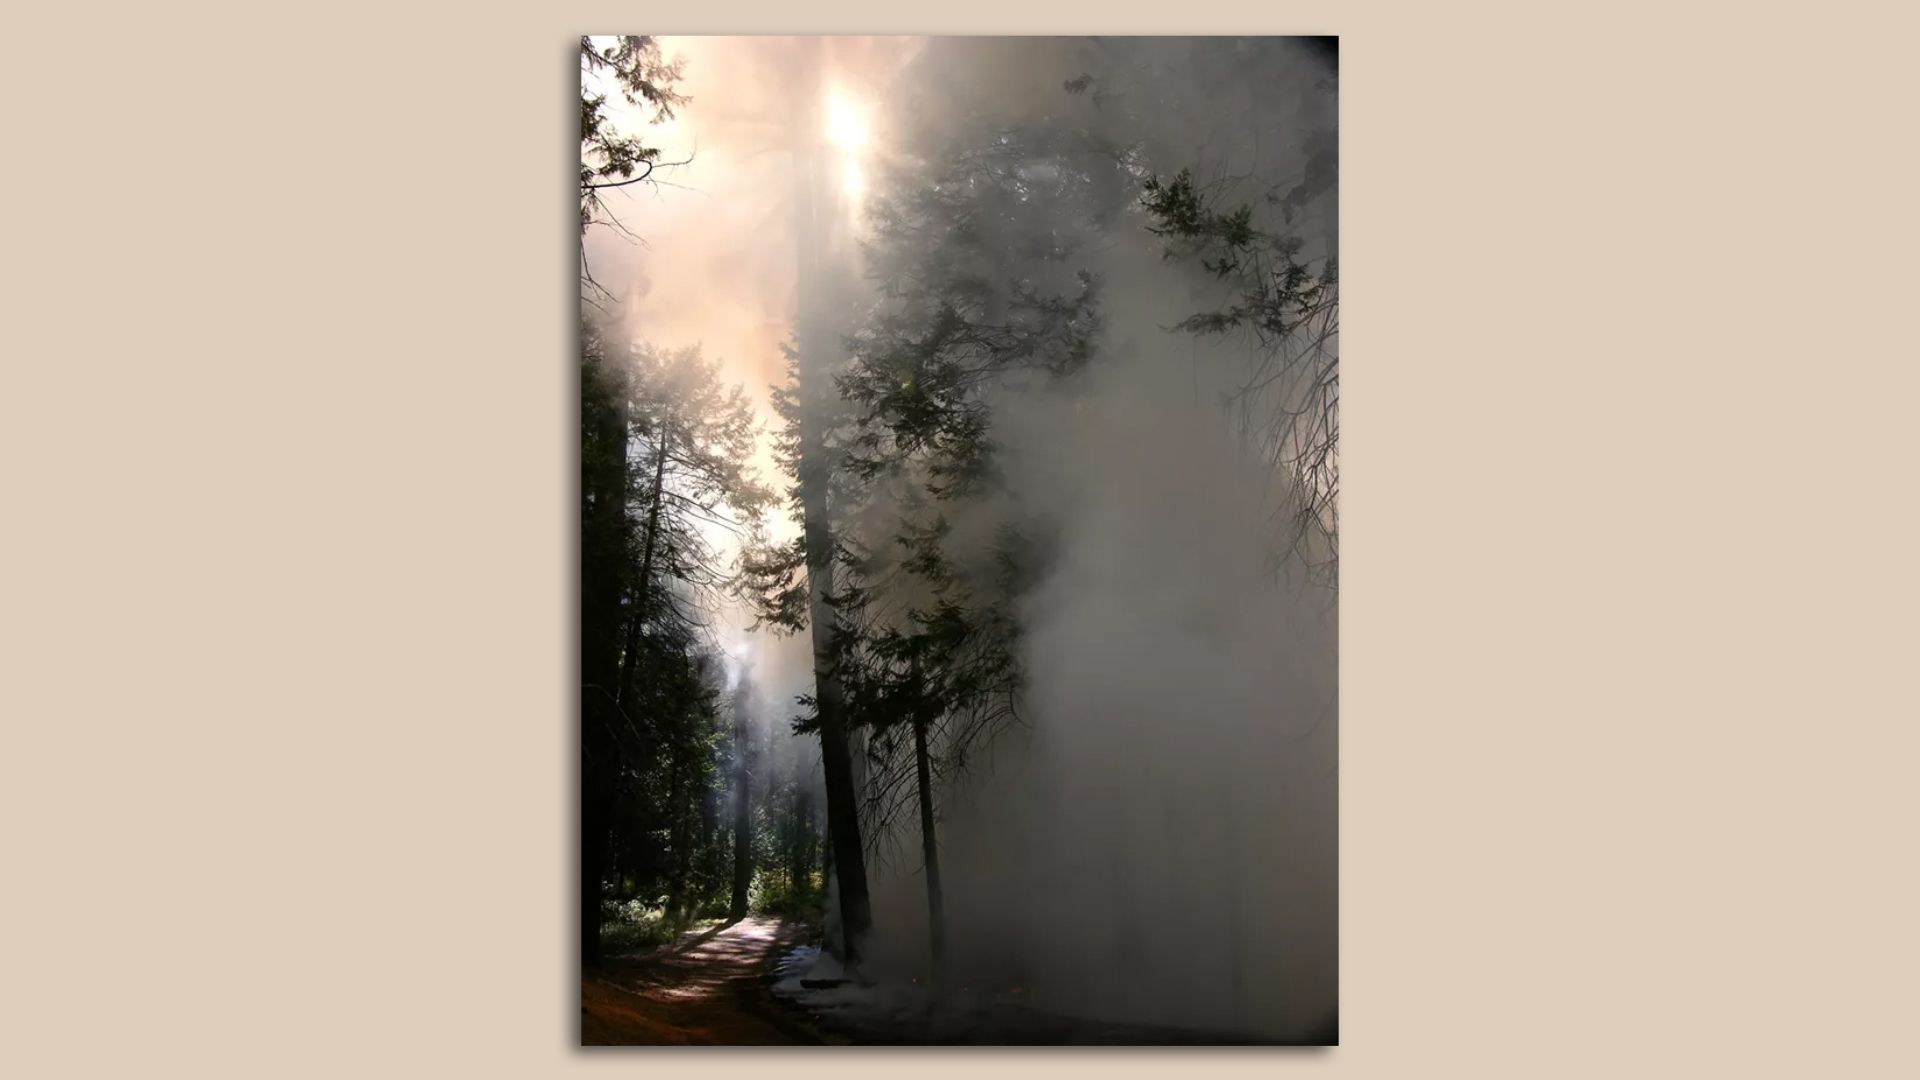 A plume of smoke envelops a stand of trees in a forest.  